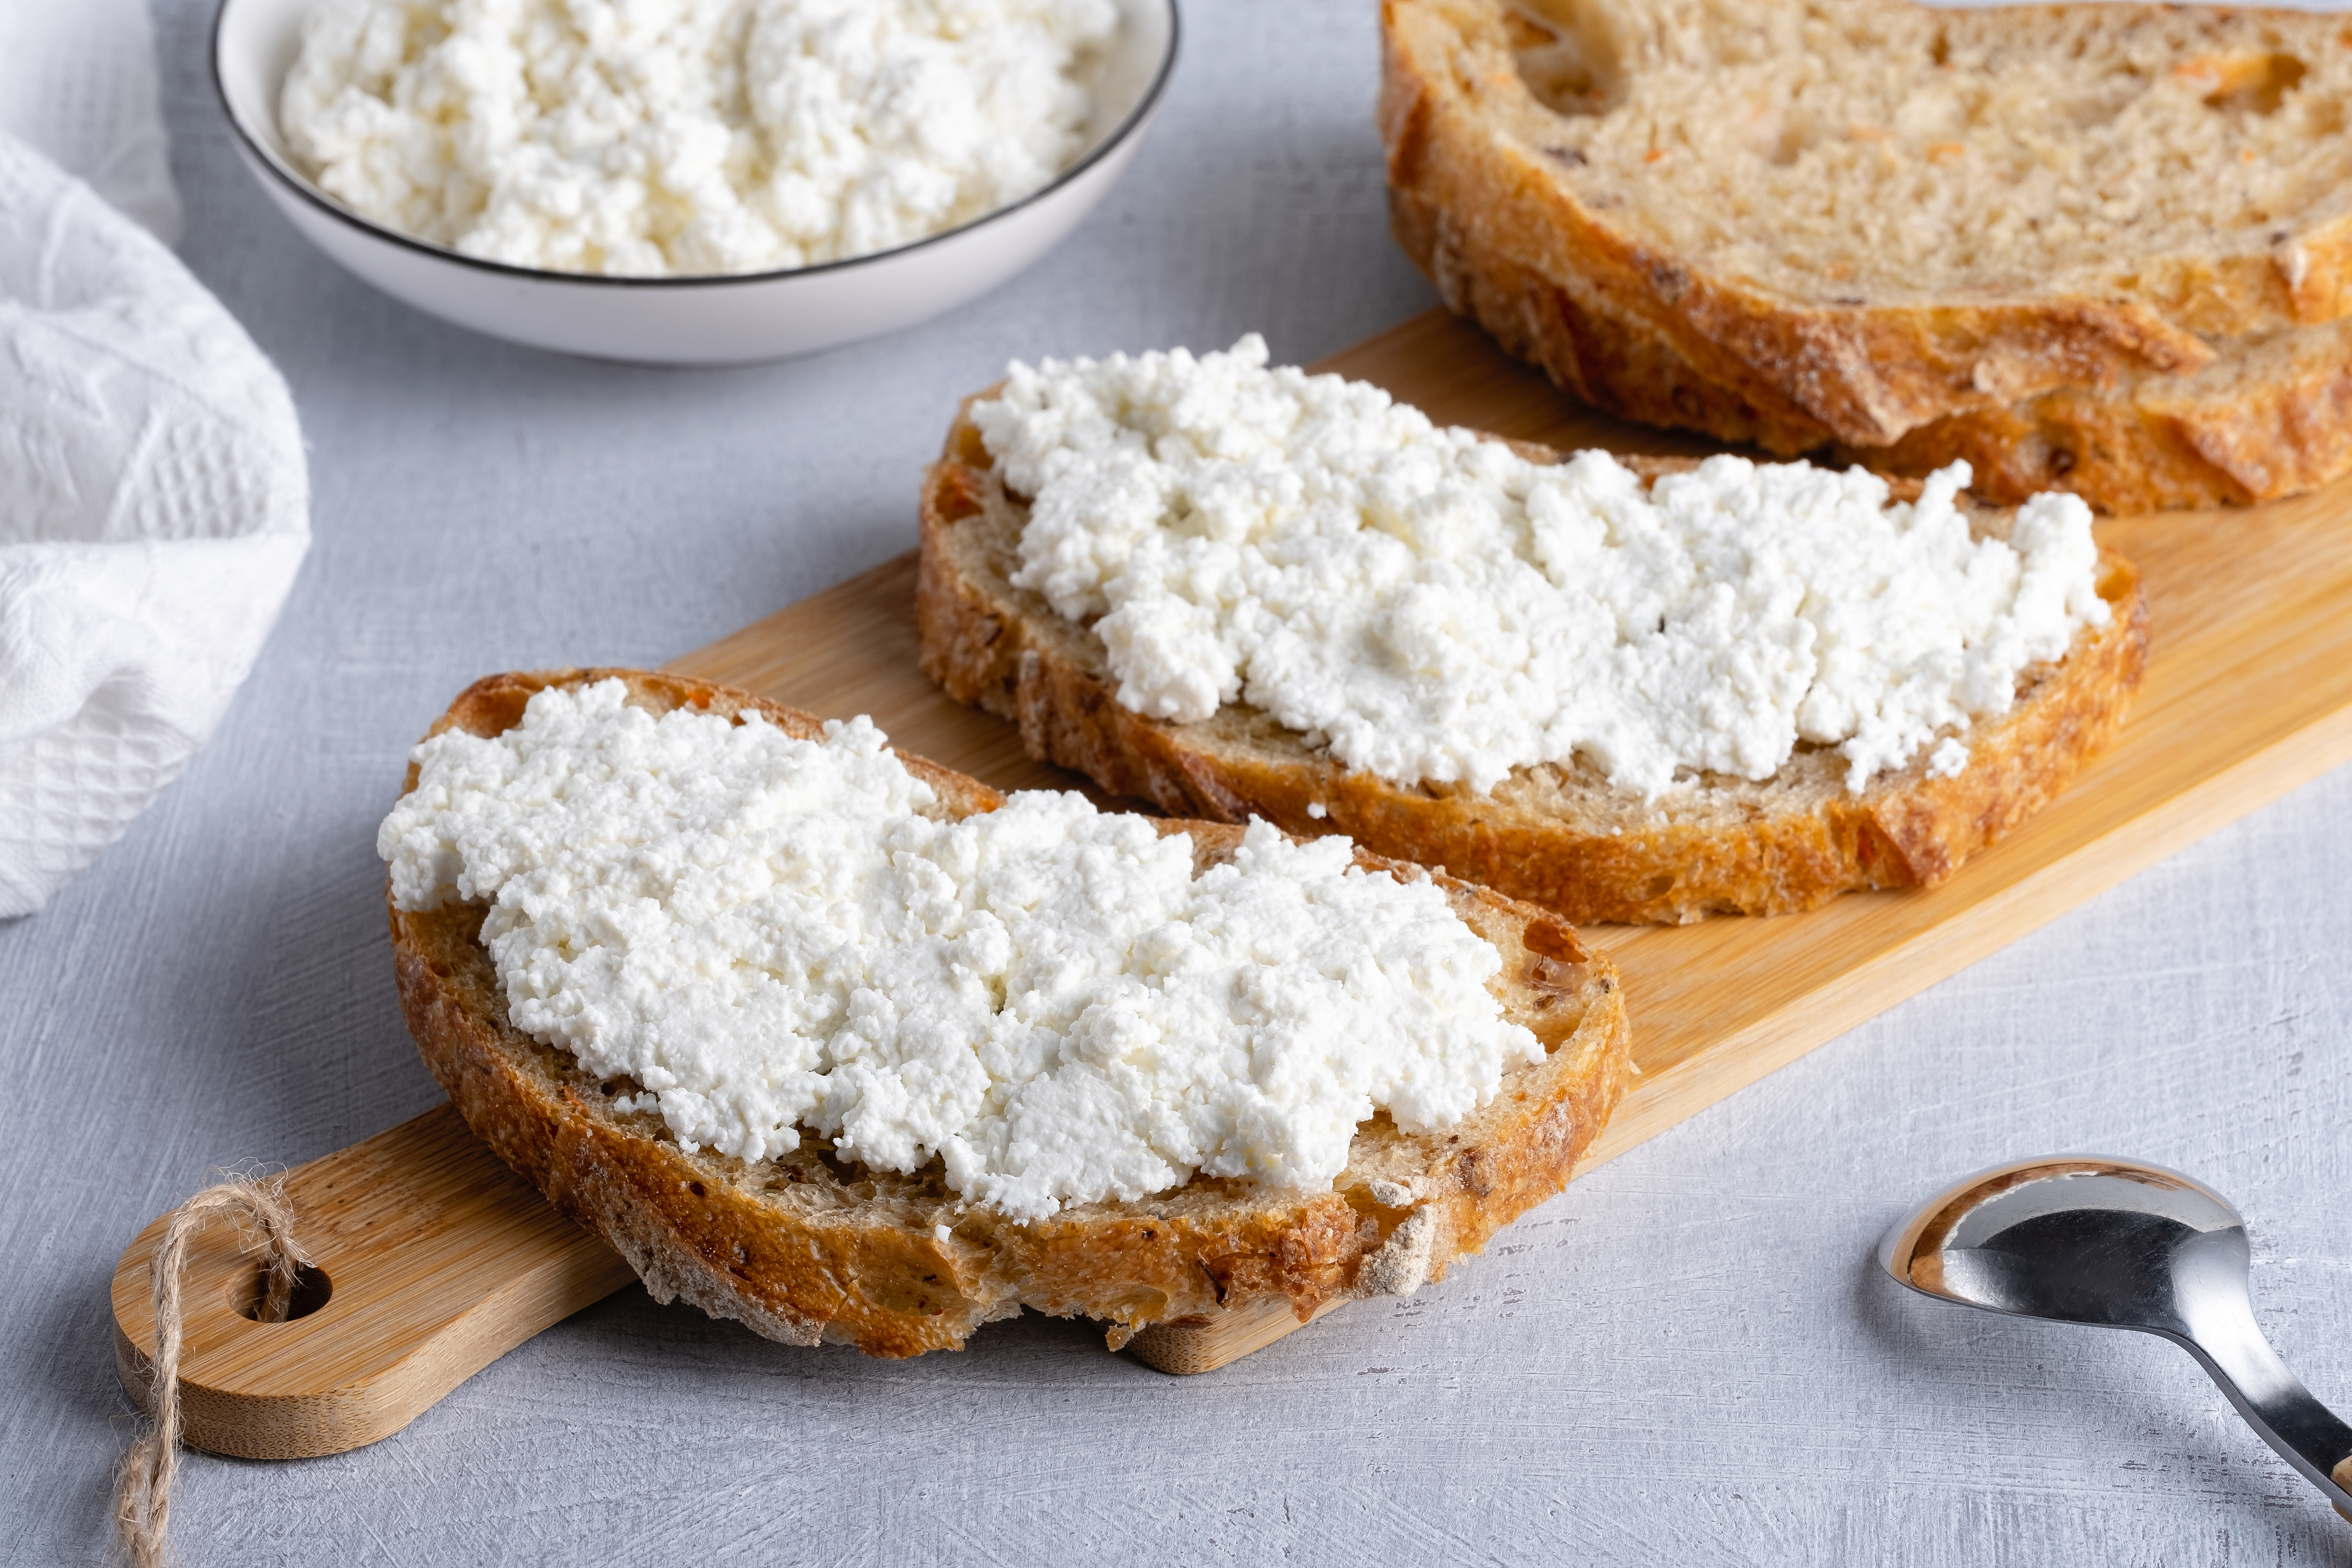 Swap milk for kefir, spread cottage cheese on toast, add miso or lentils into stews, or olives into salads